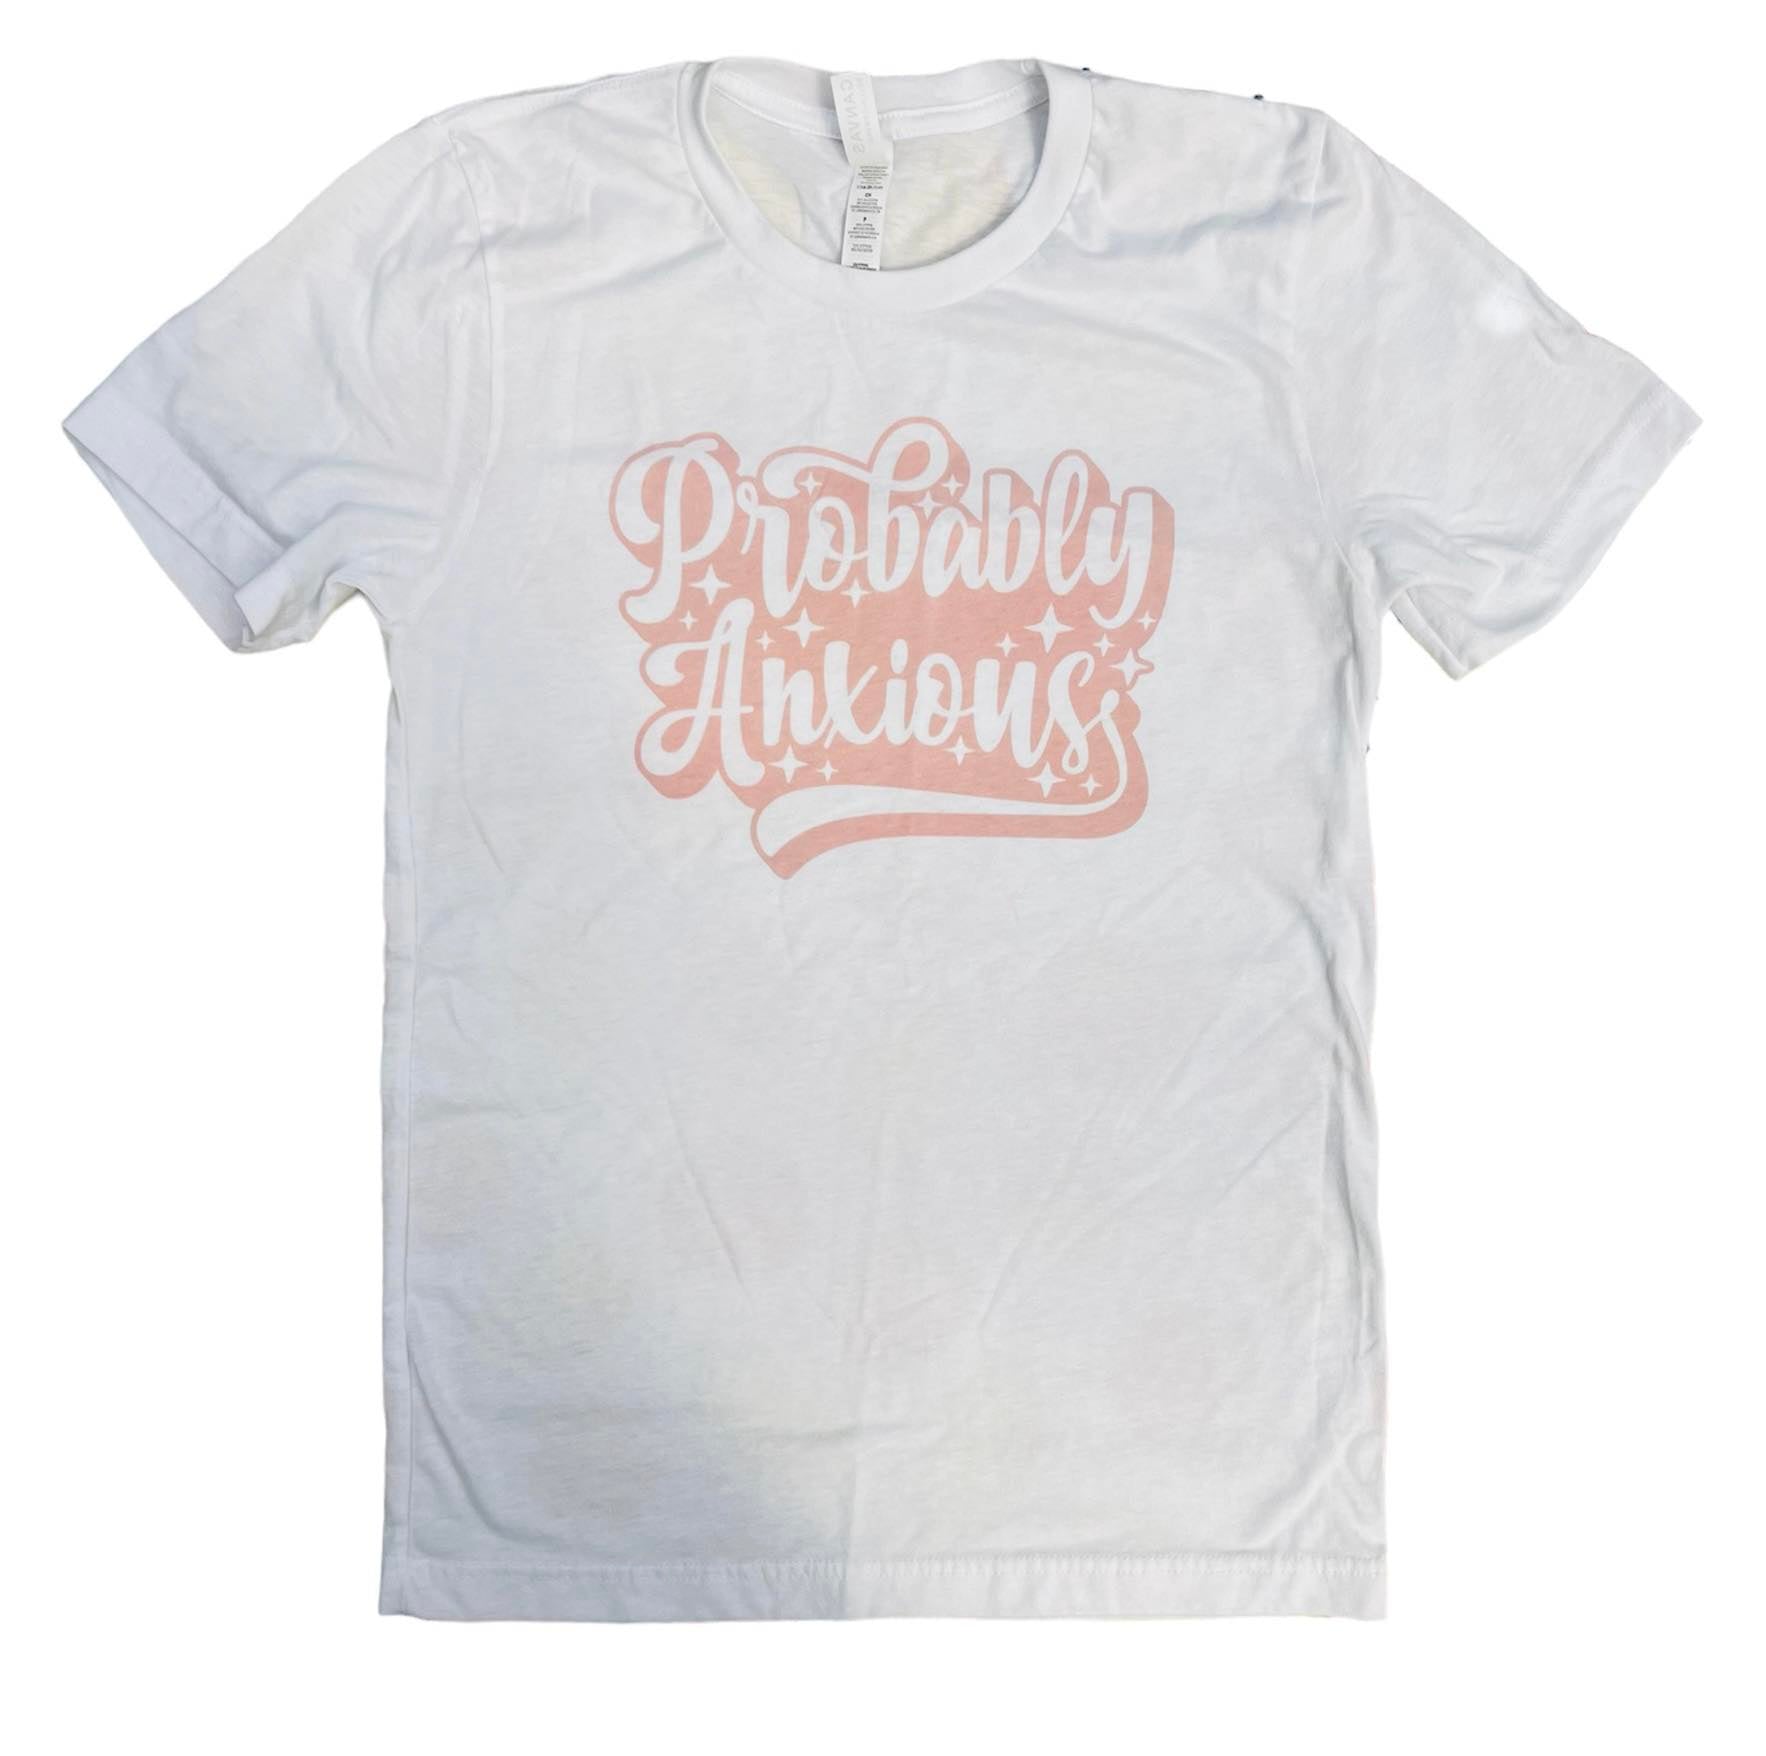 Probably Anxious Tee in White